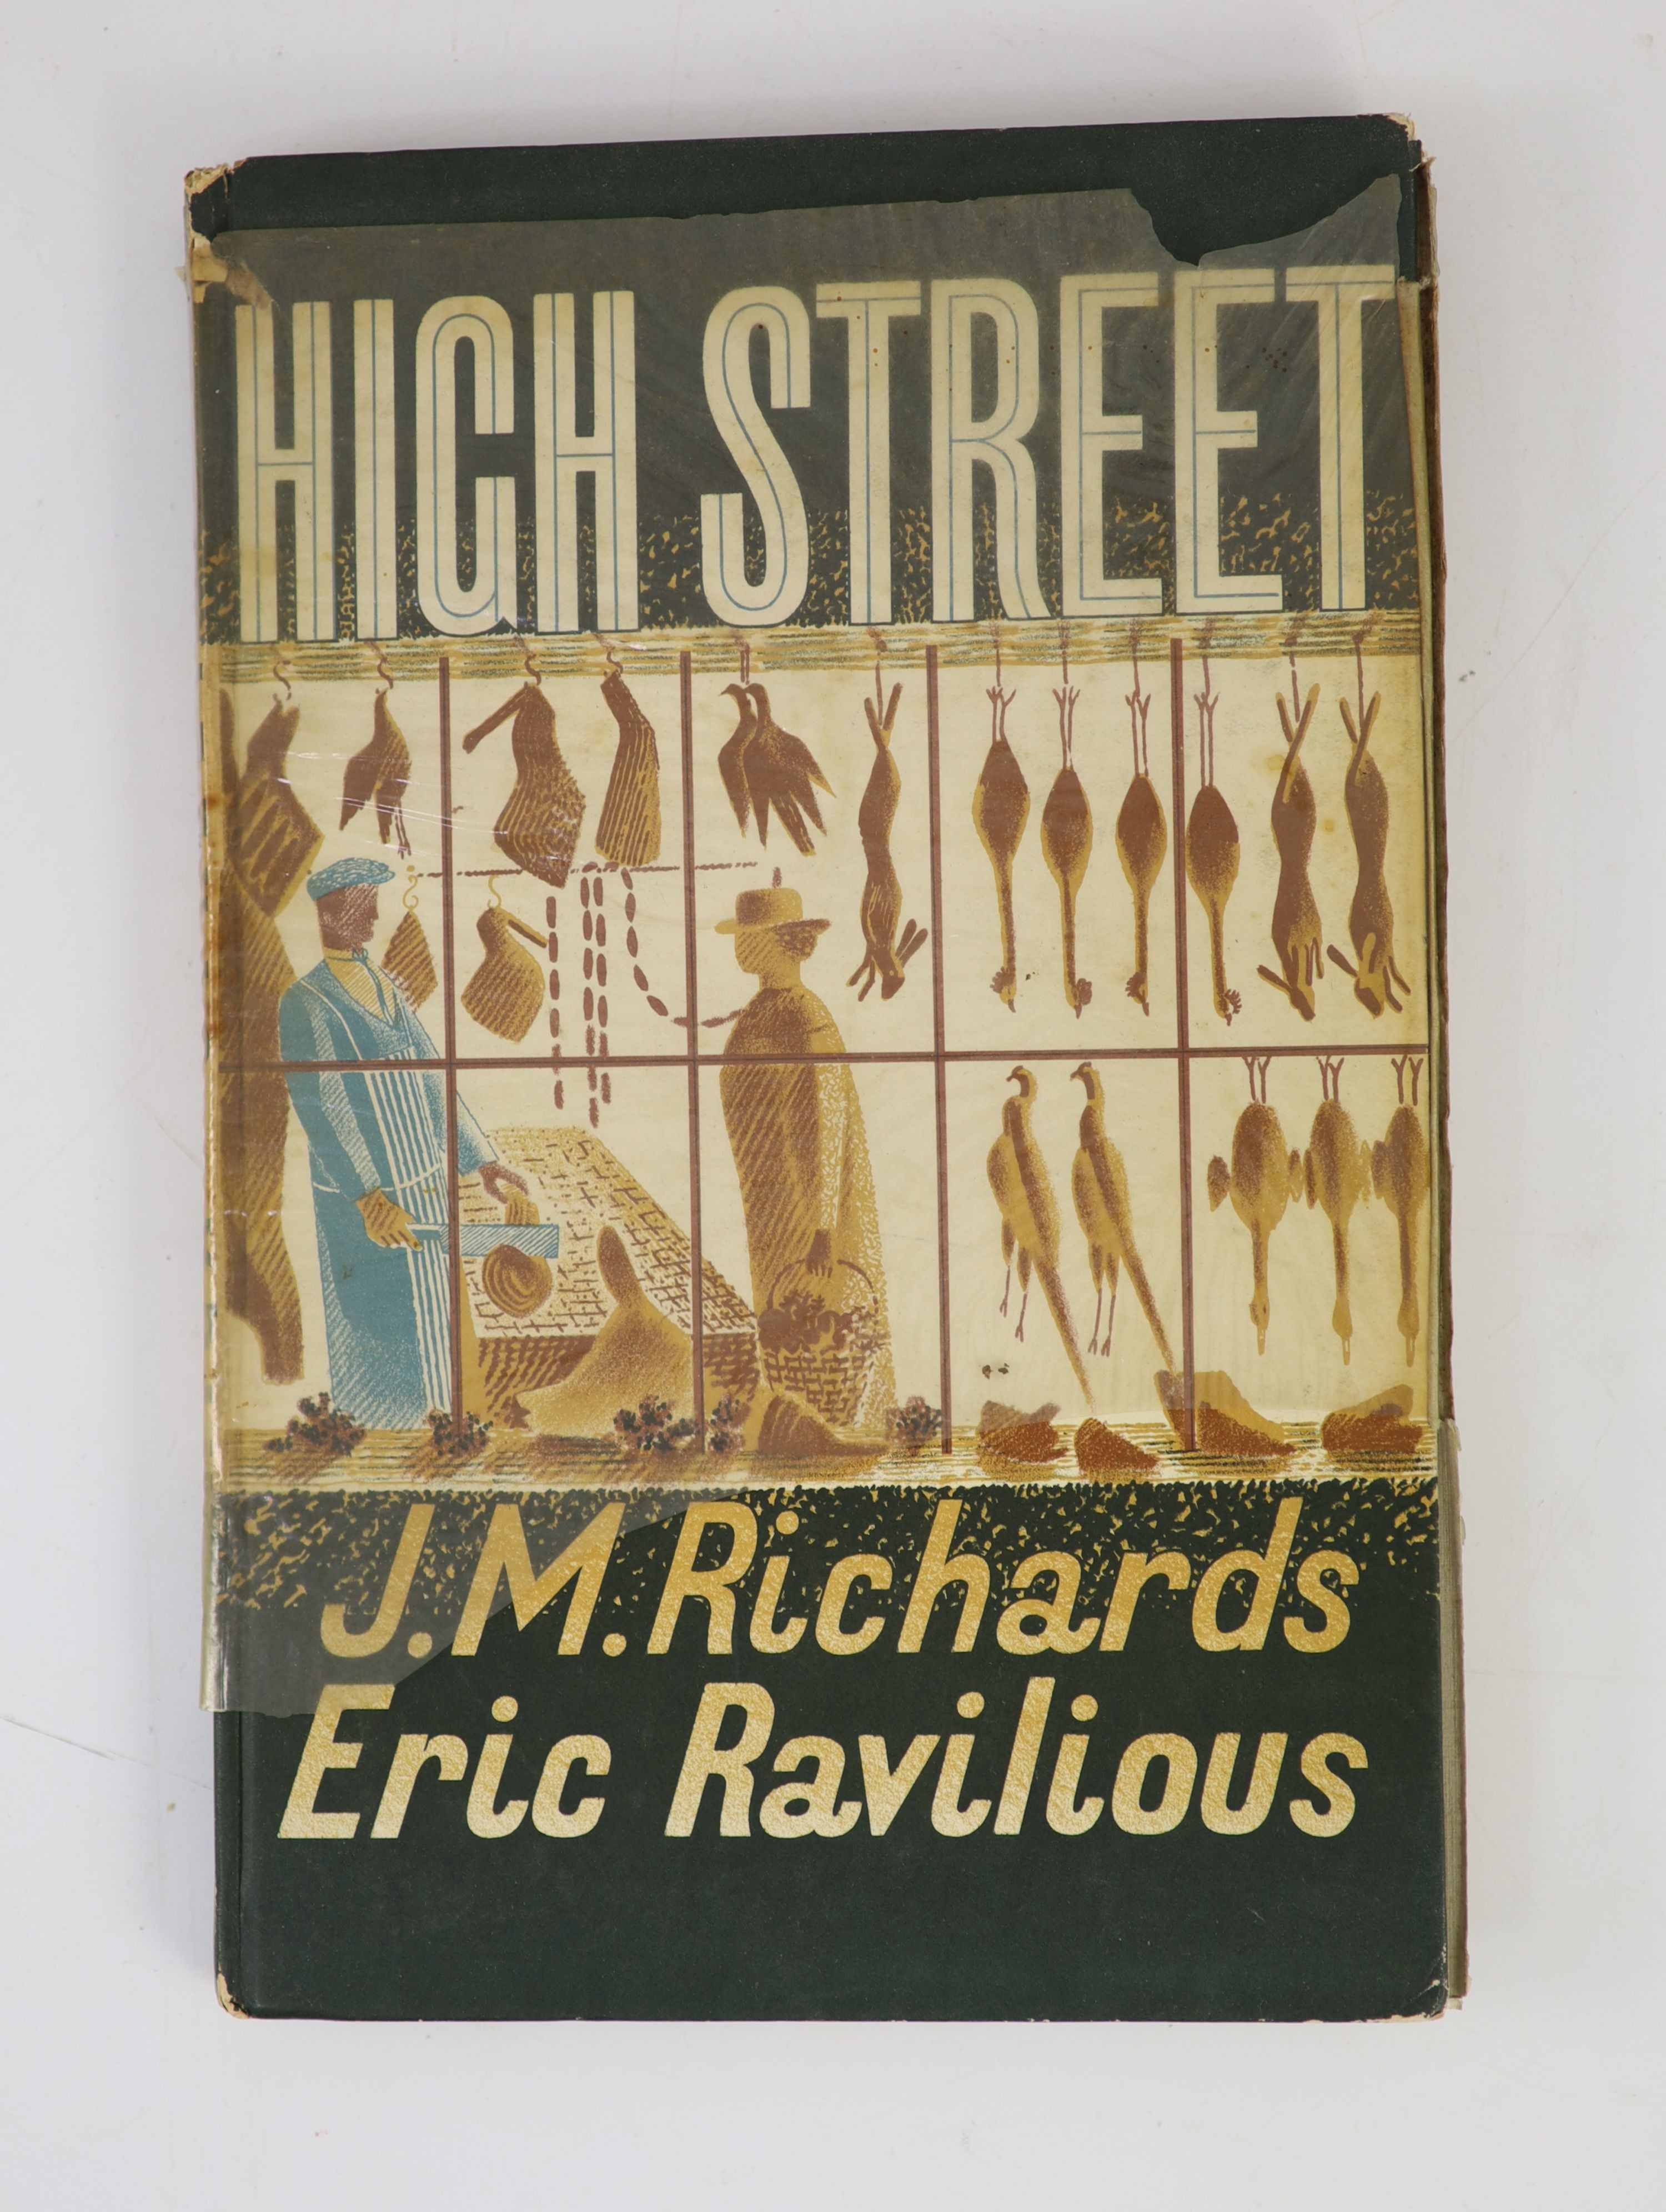 Richards, J.M - High Street, illustrated by Eric Ravilious, 8vo, original pictorial boards, with 24 coloured lithographs, Country Life, London, 1938